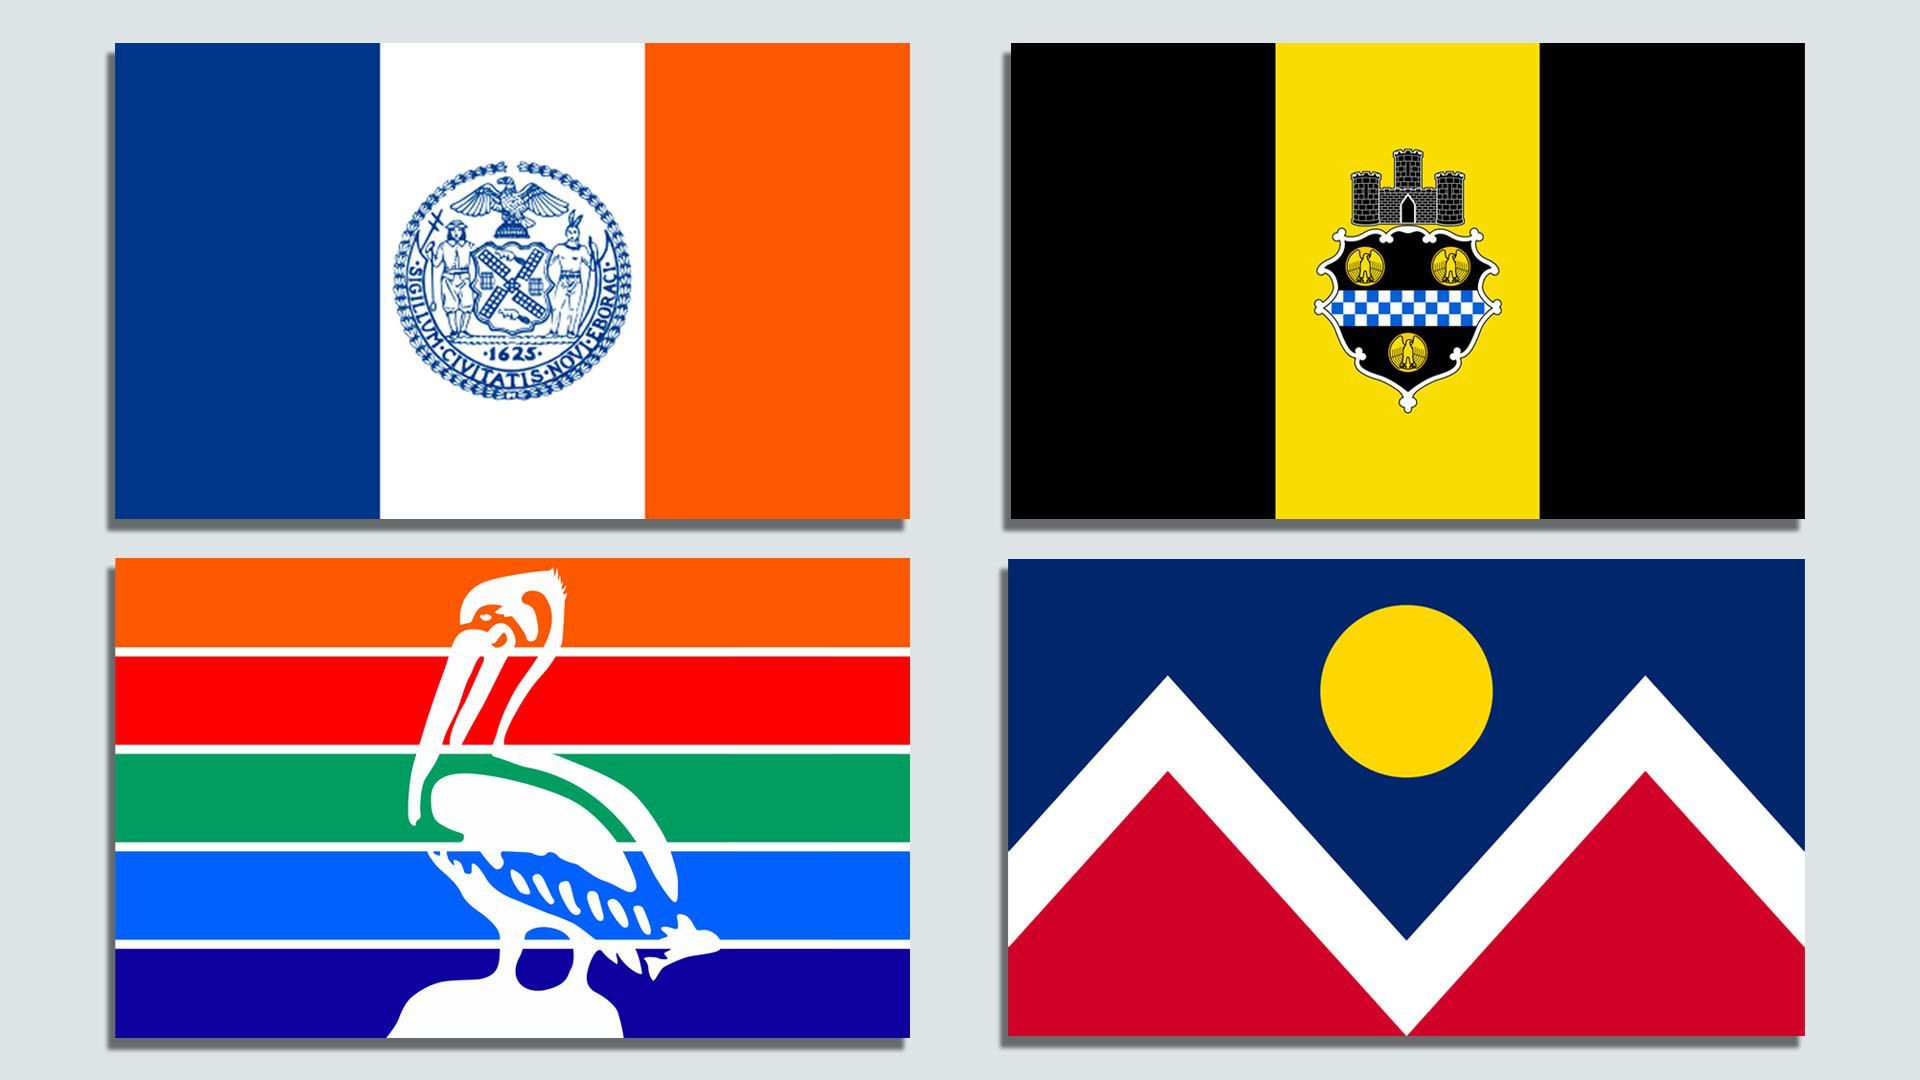 Clockwise from top left: The New York City flag, the Pittsburgh flag, the Denver flag, and the St. Petersburg, Fla., flag.